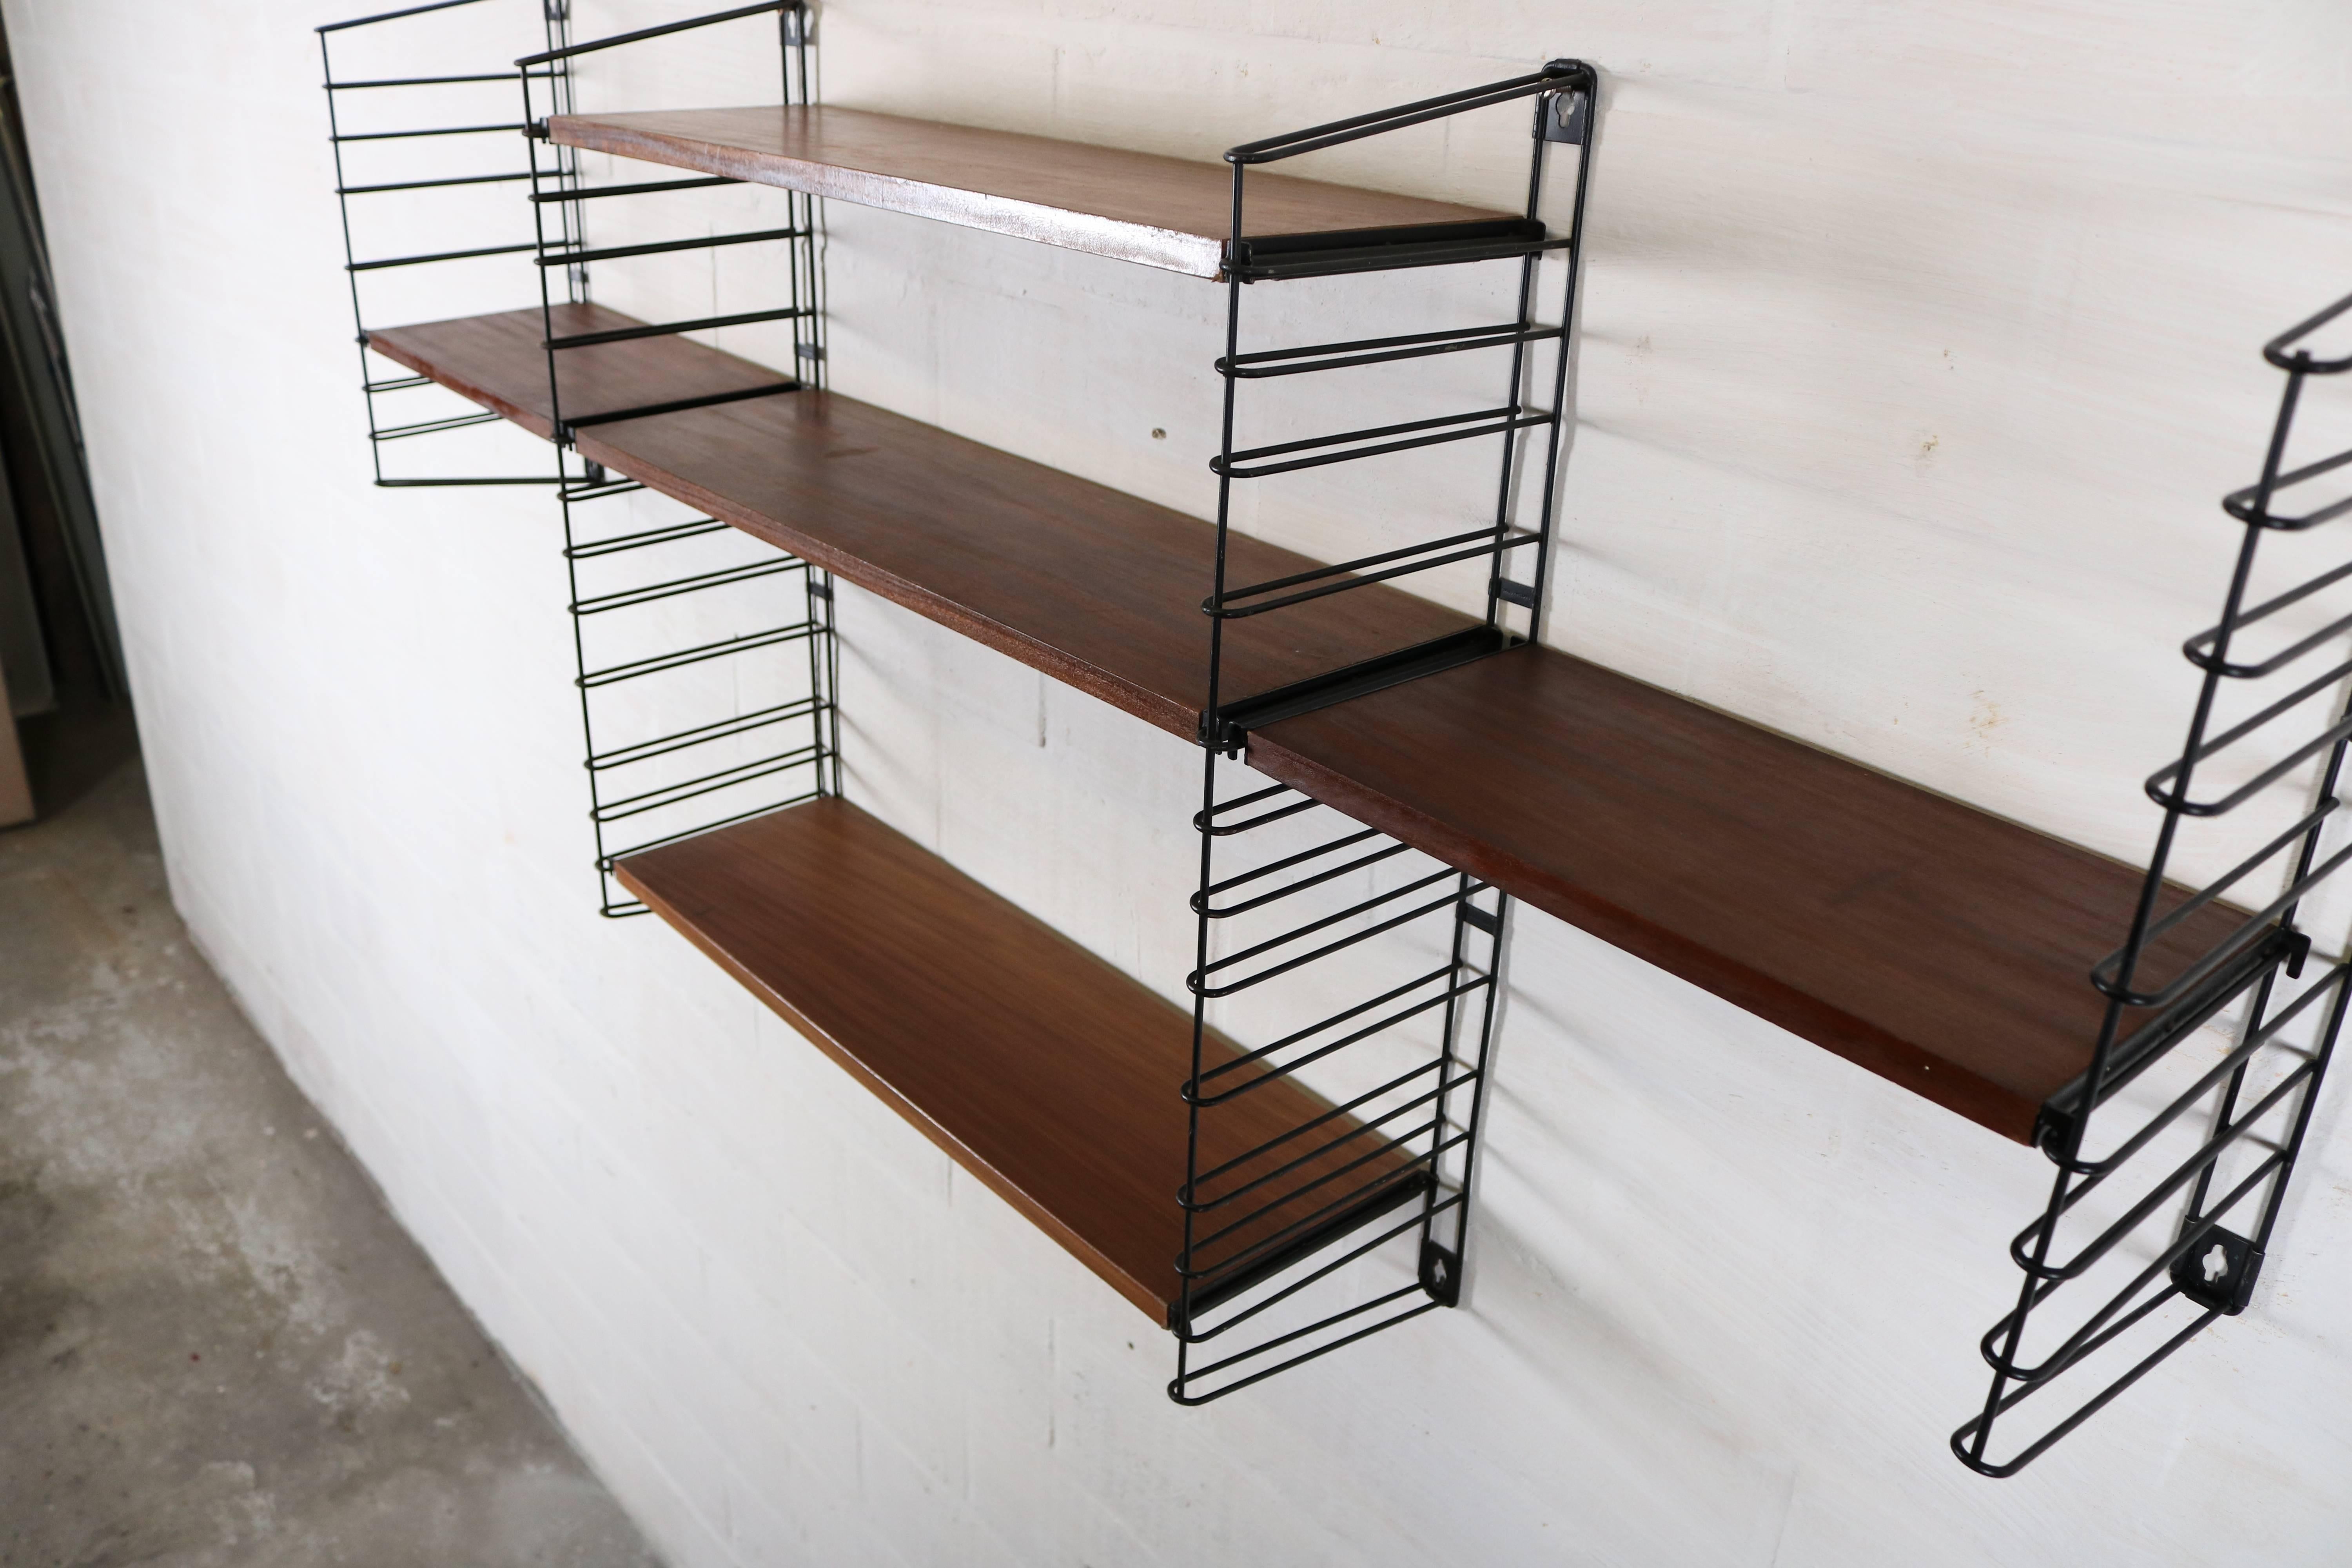 Tomado shelving unit in a good condition.
With teak shelves and black metal risers.